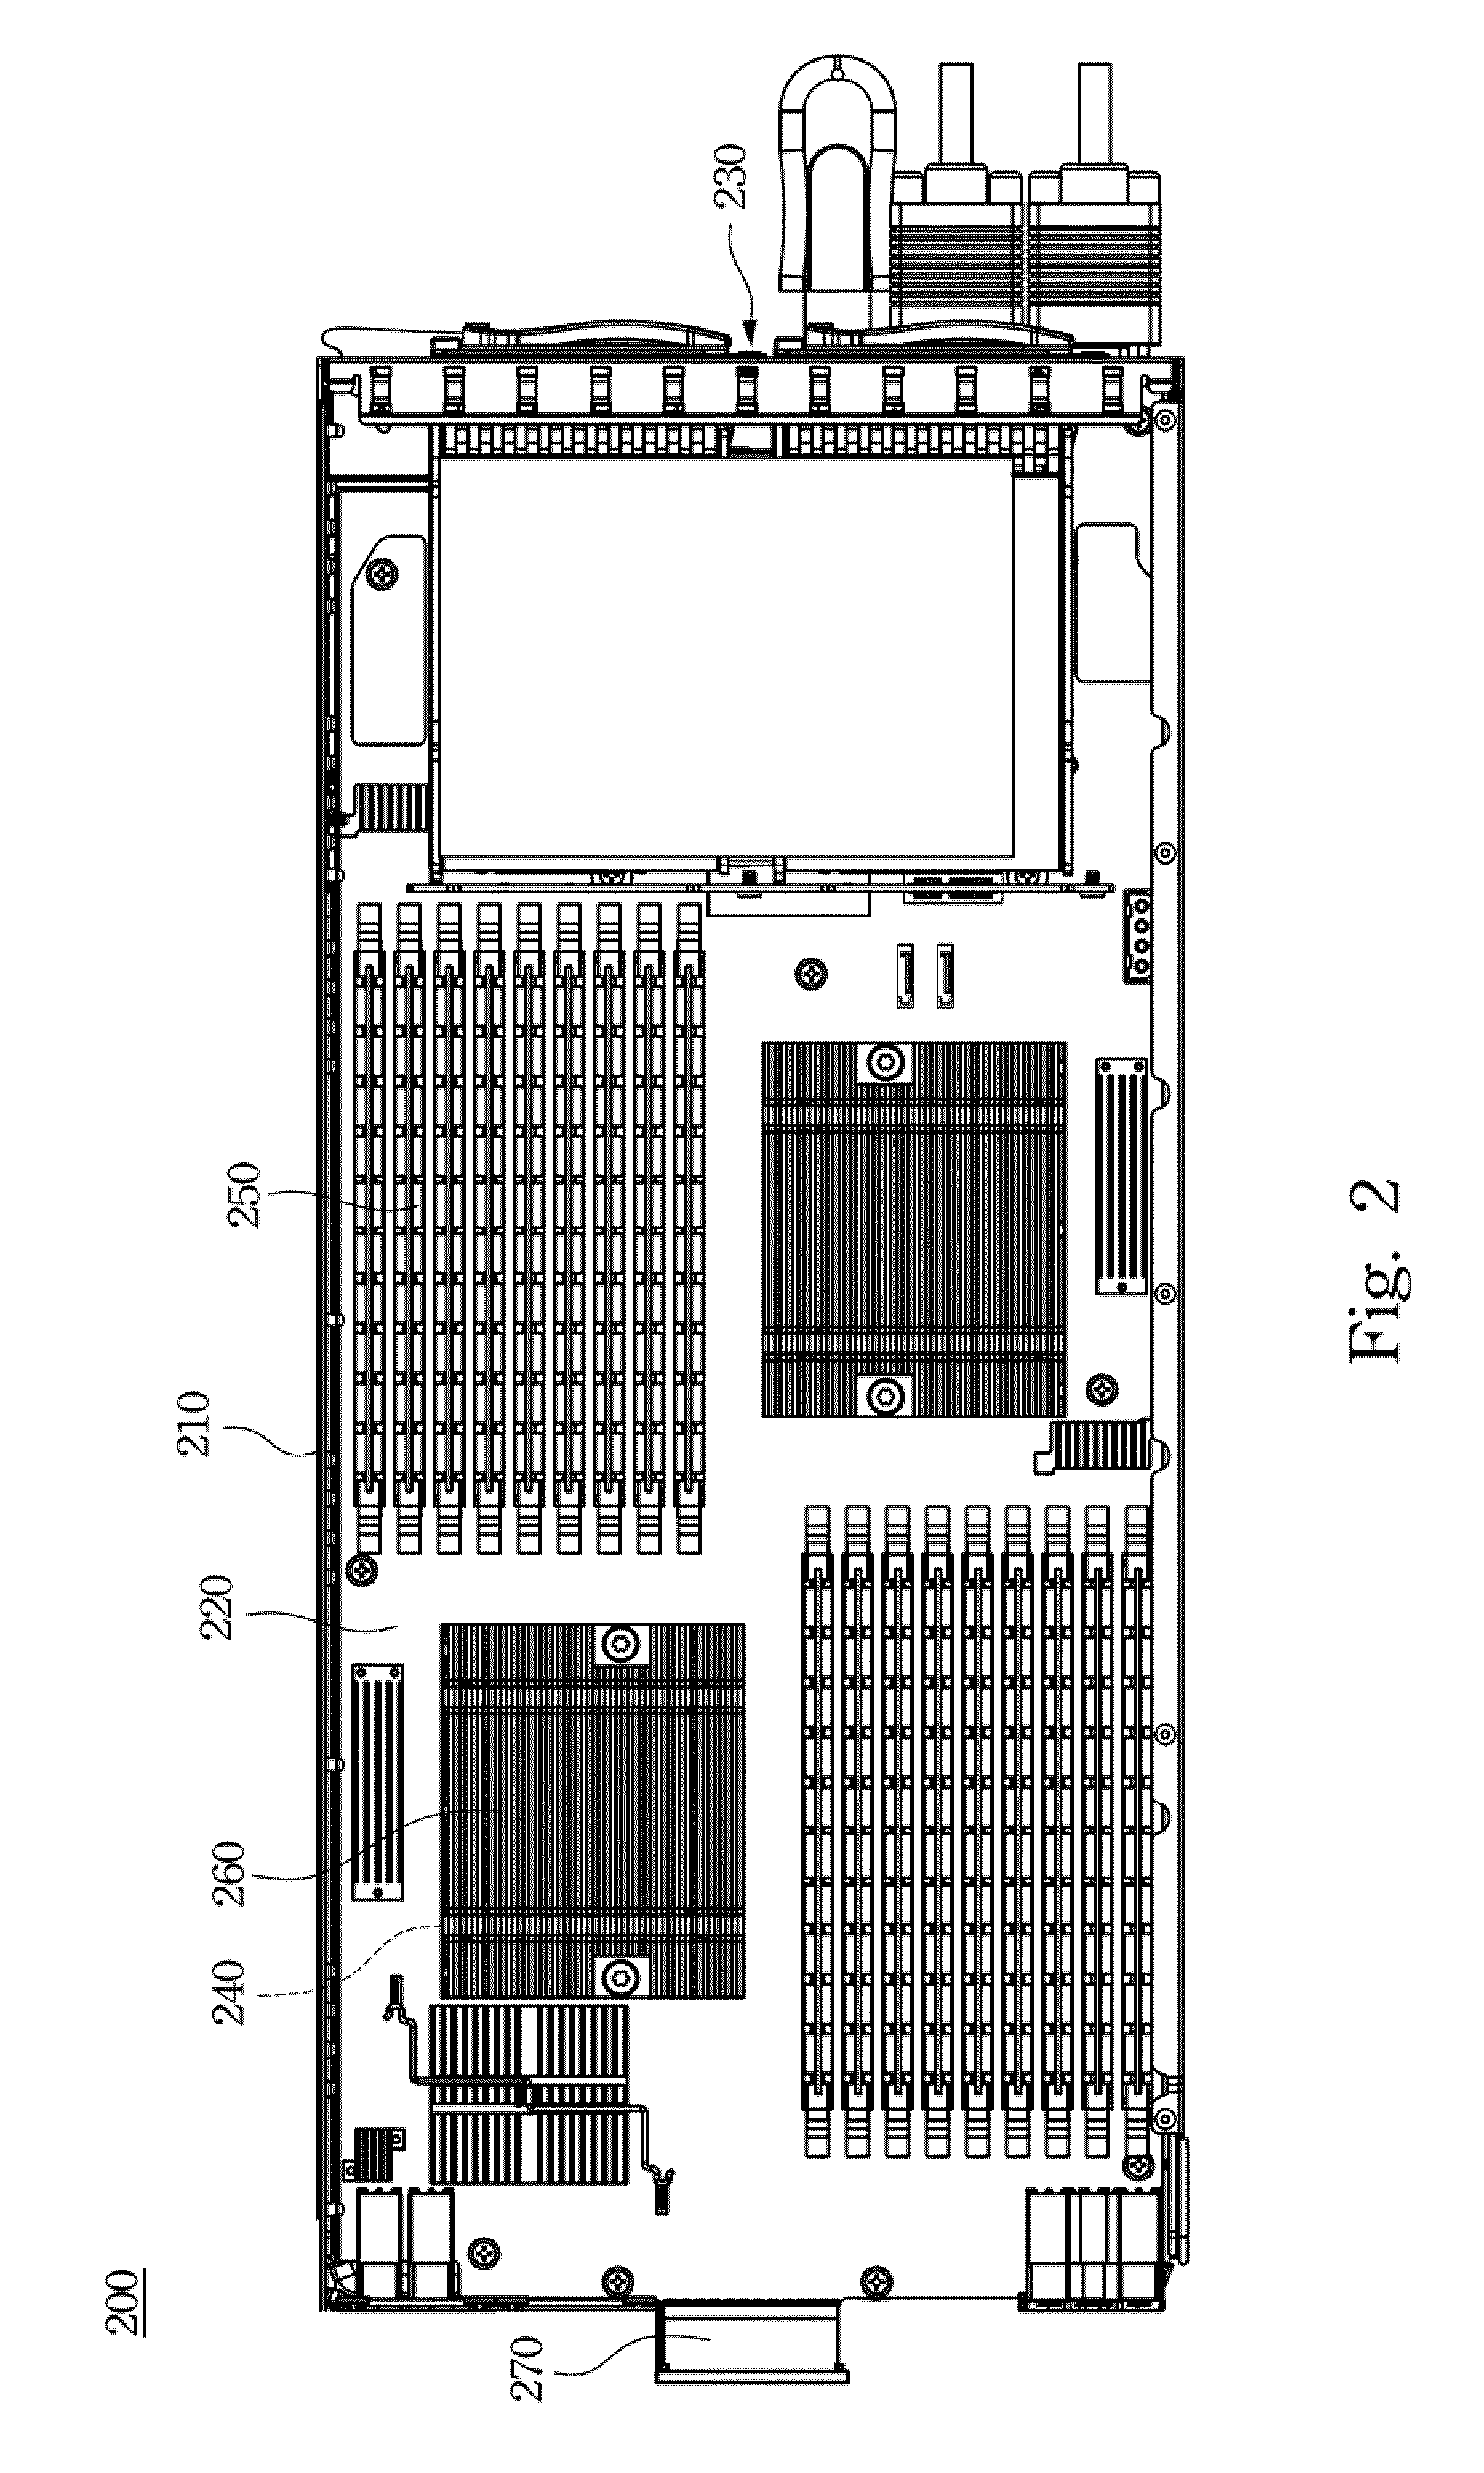 Server device with a storage array module